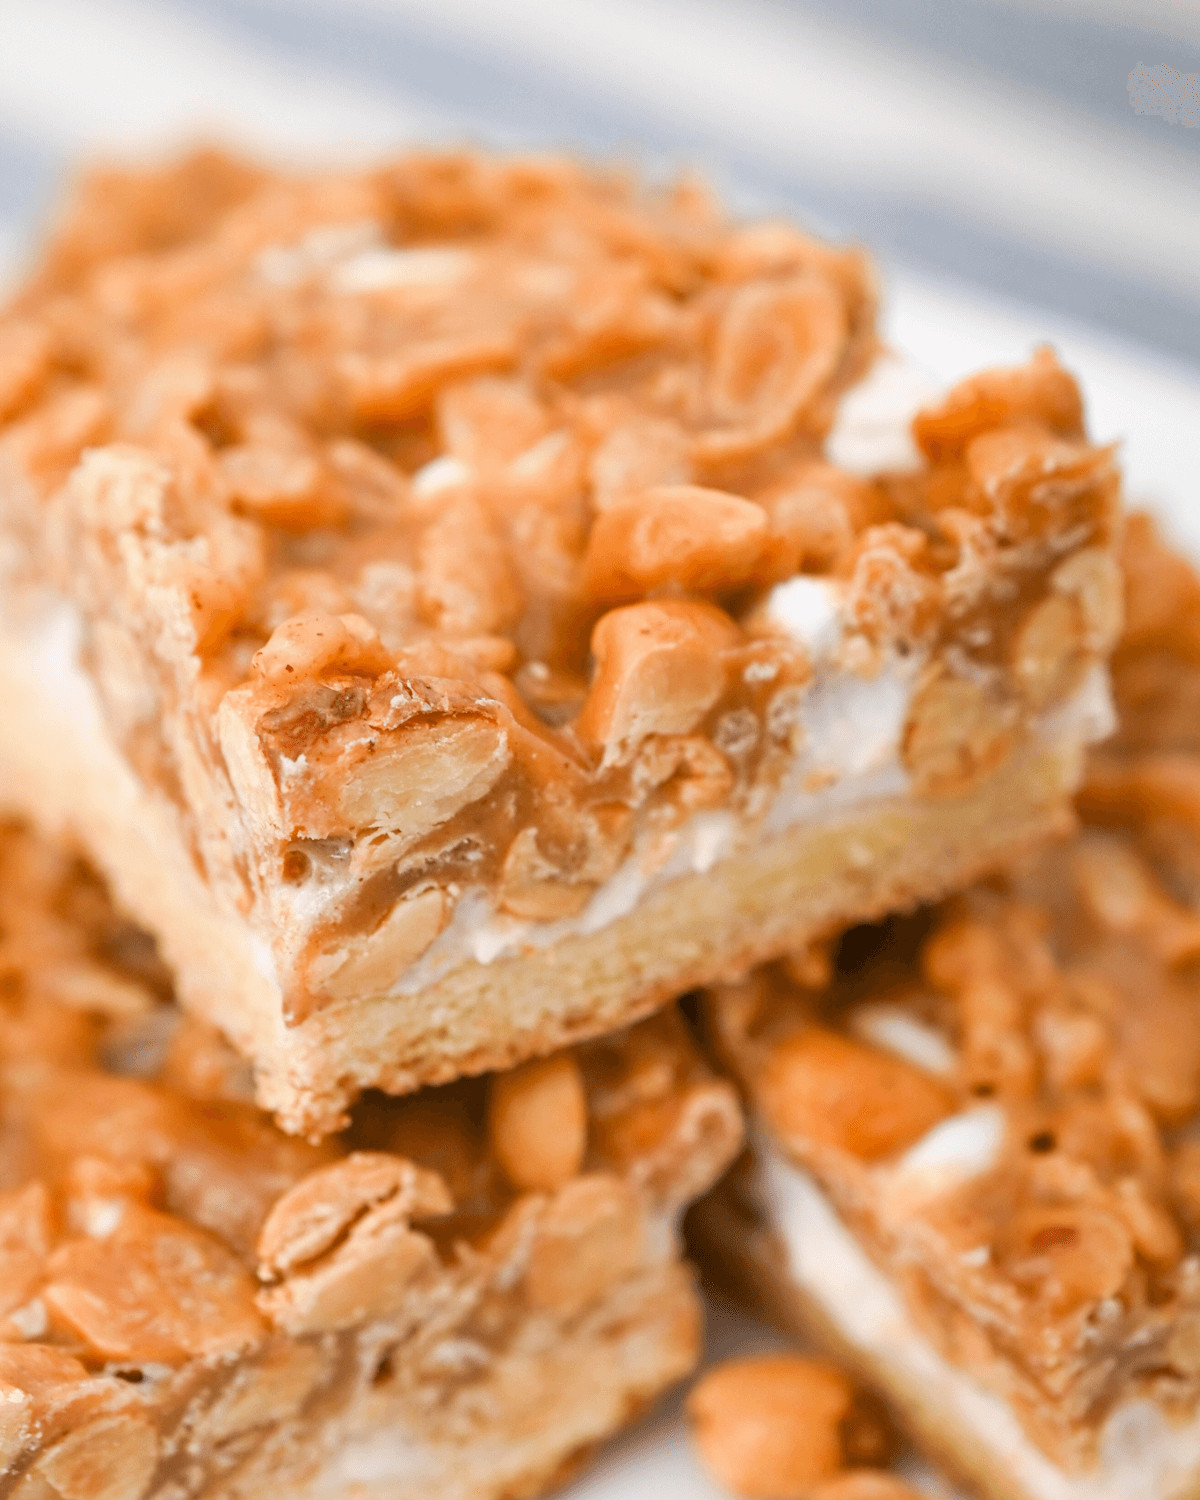 Crunchy Peanut Butter Bars stacked on a dish.